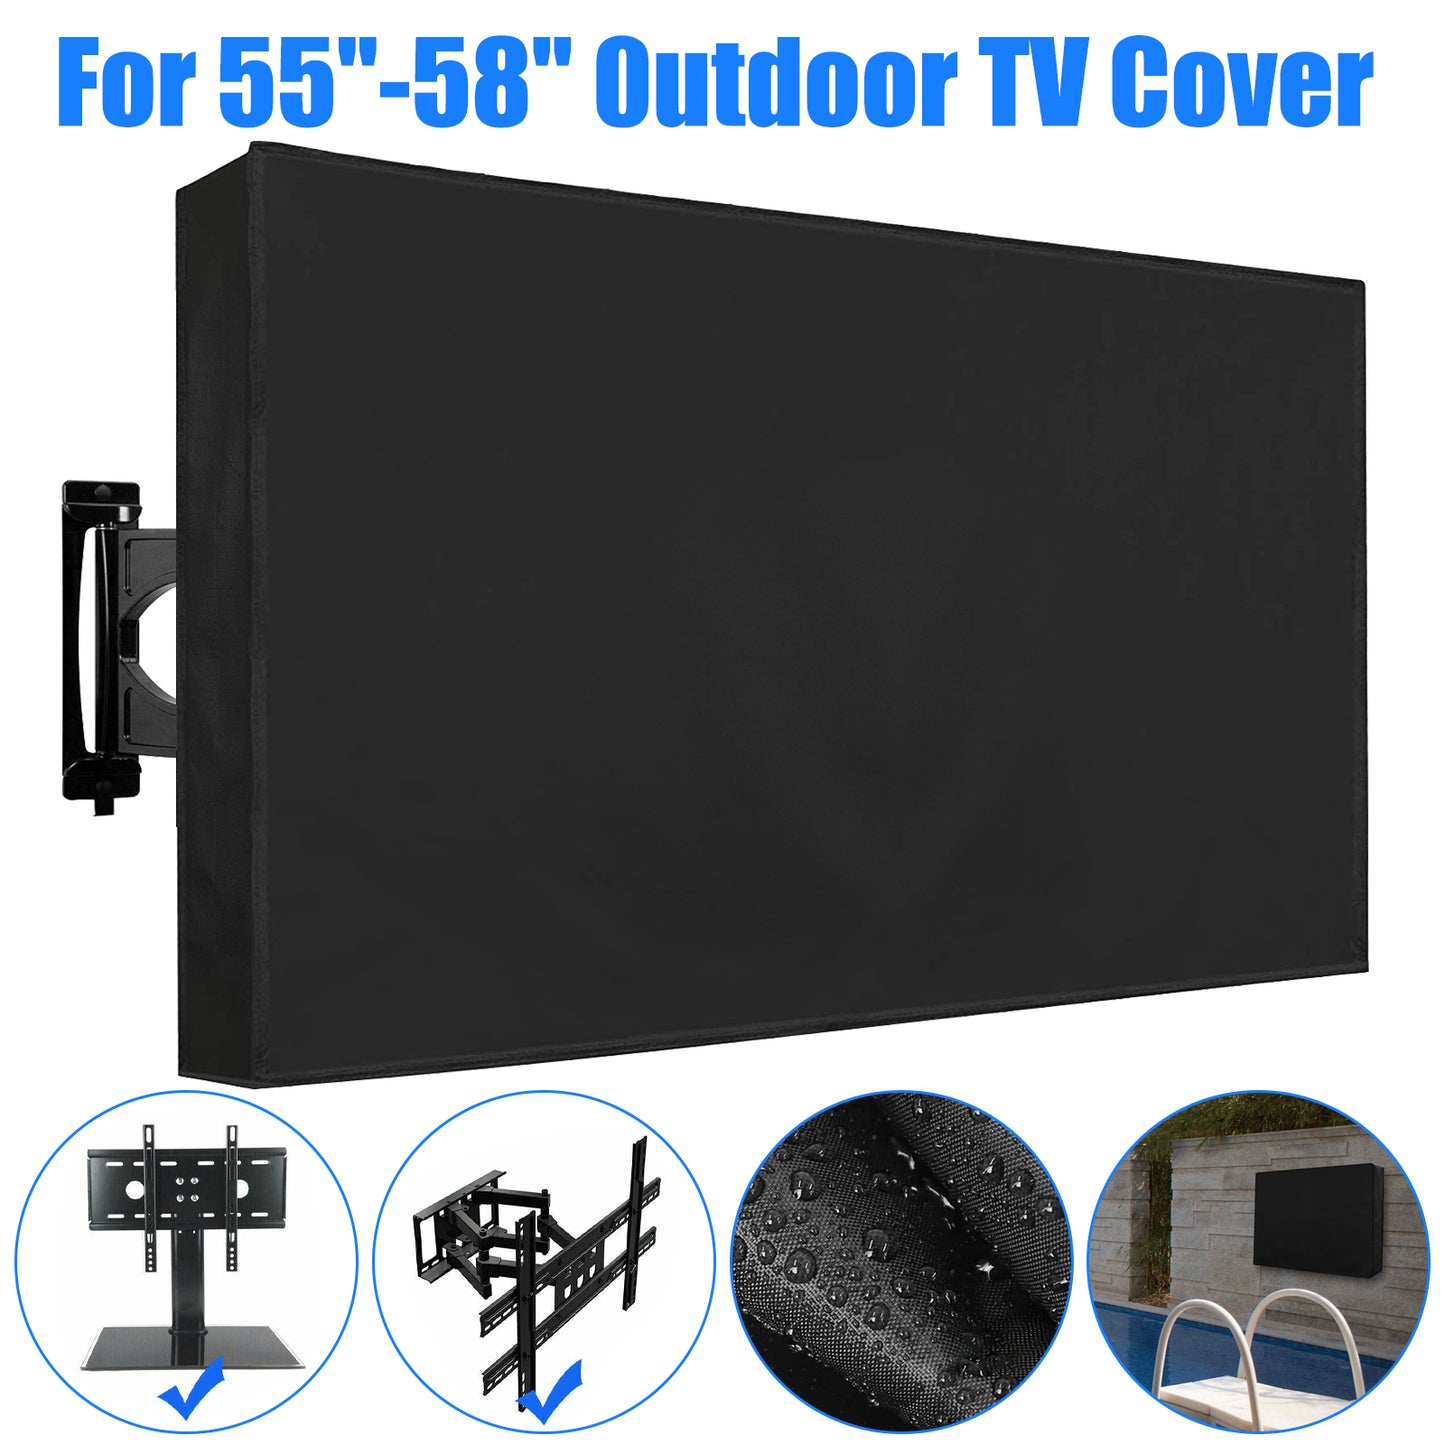 Outdoor Waterproof 55-58" TV Cover - Weatherproof TV Protection TV Cover for  Outside Flat Screen TV（Black）